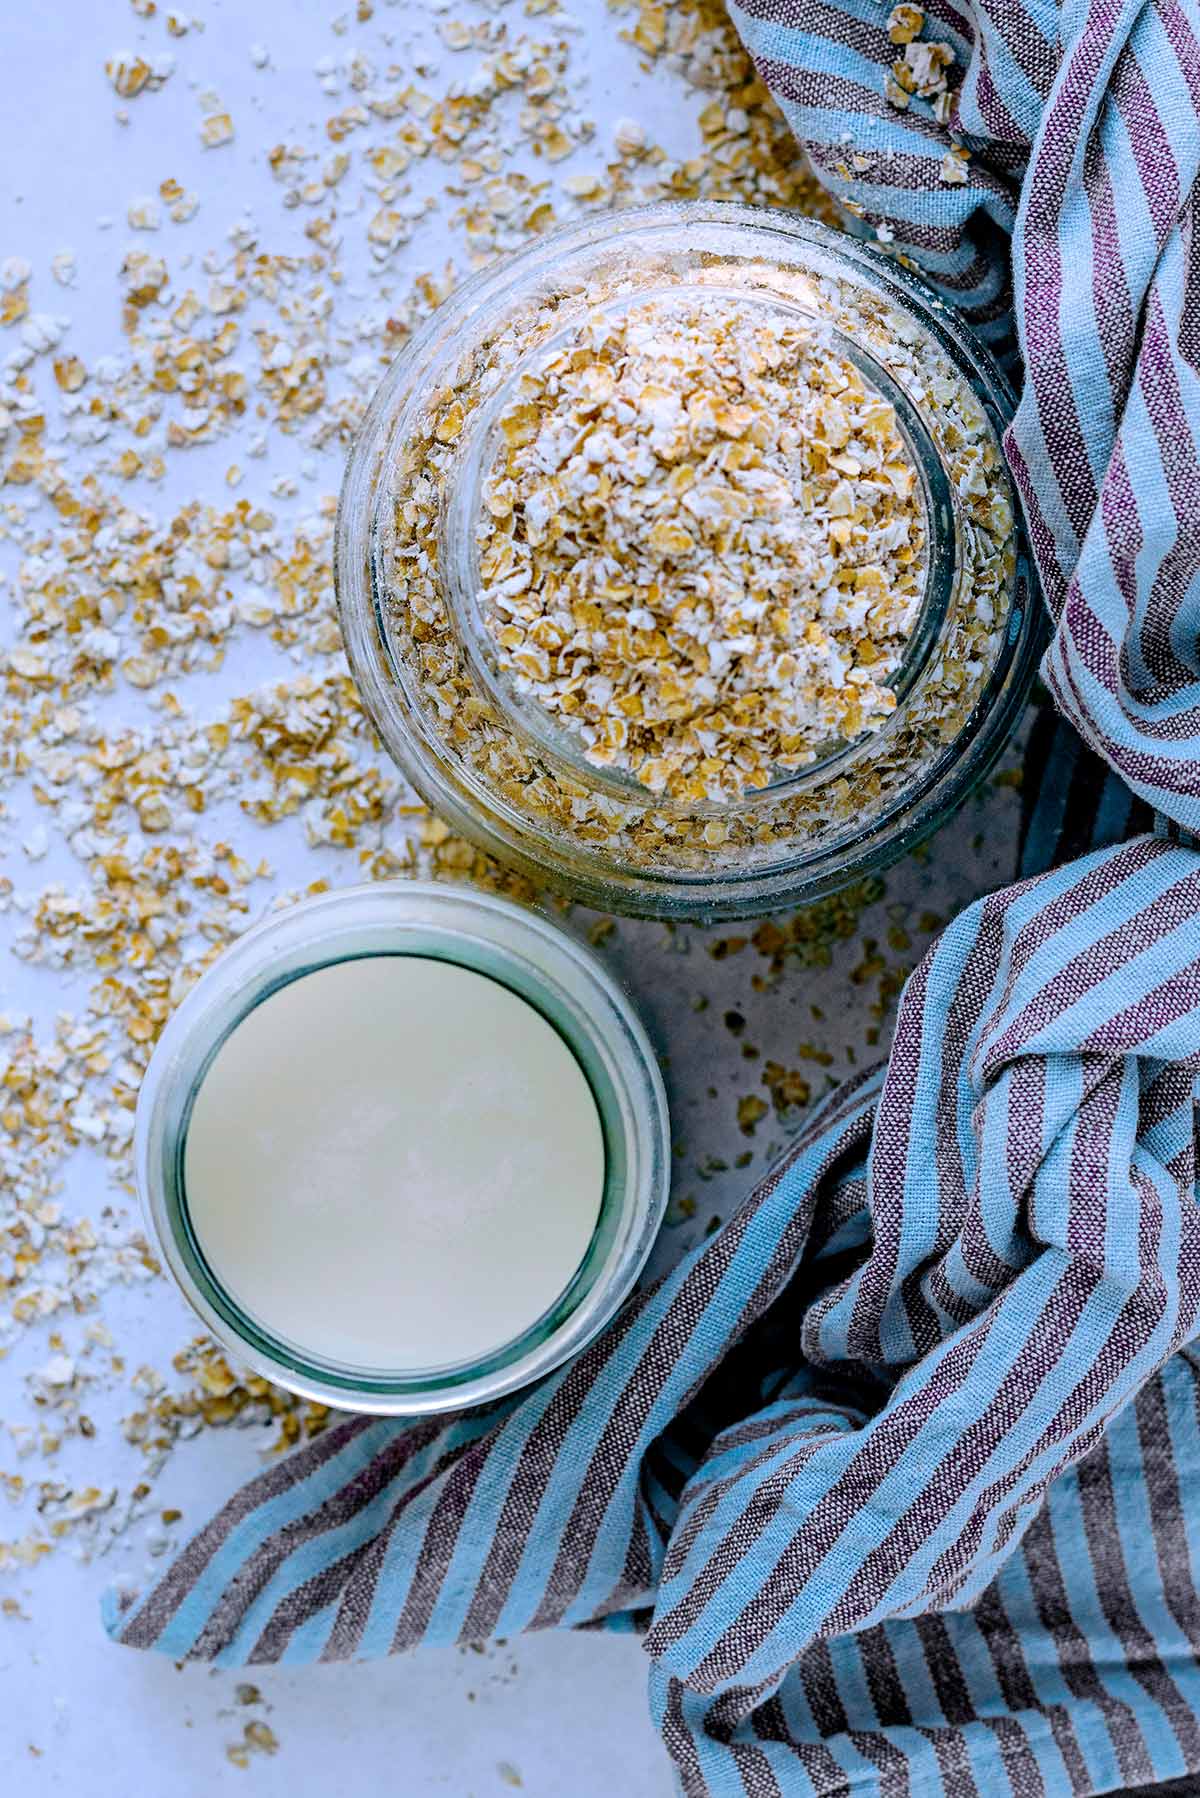 A glass of oat milk and a jar full of oats viewed from above.